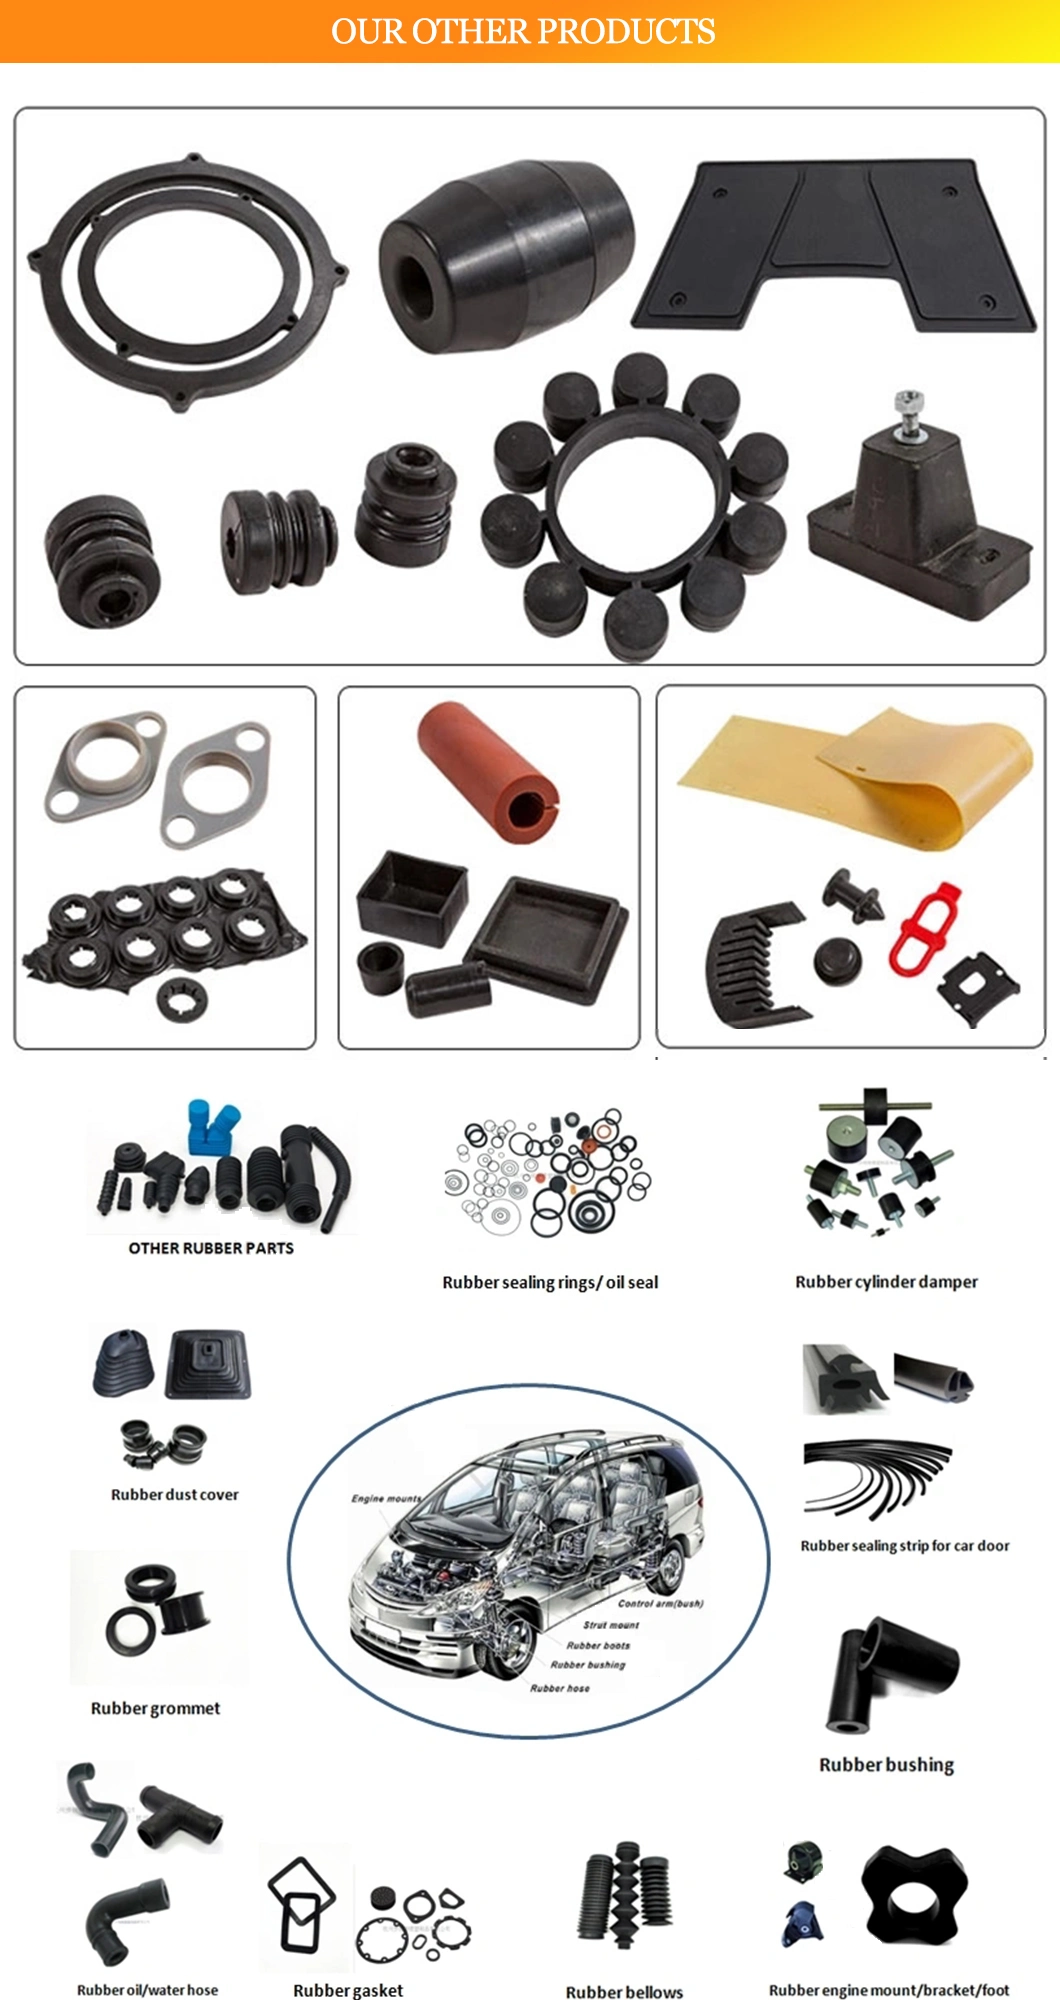 10mm 12mm 14mm 16mm 18mm 20mm OEM Rubber Silicone Rubber Grip for Velocipede